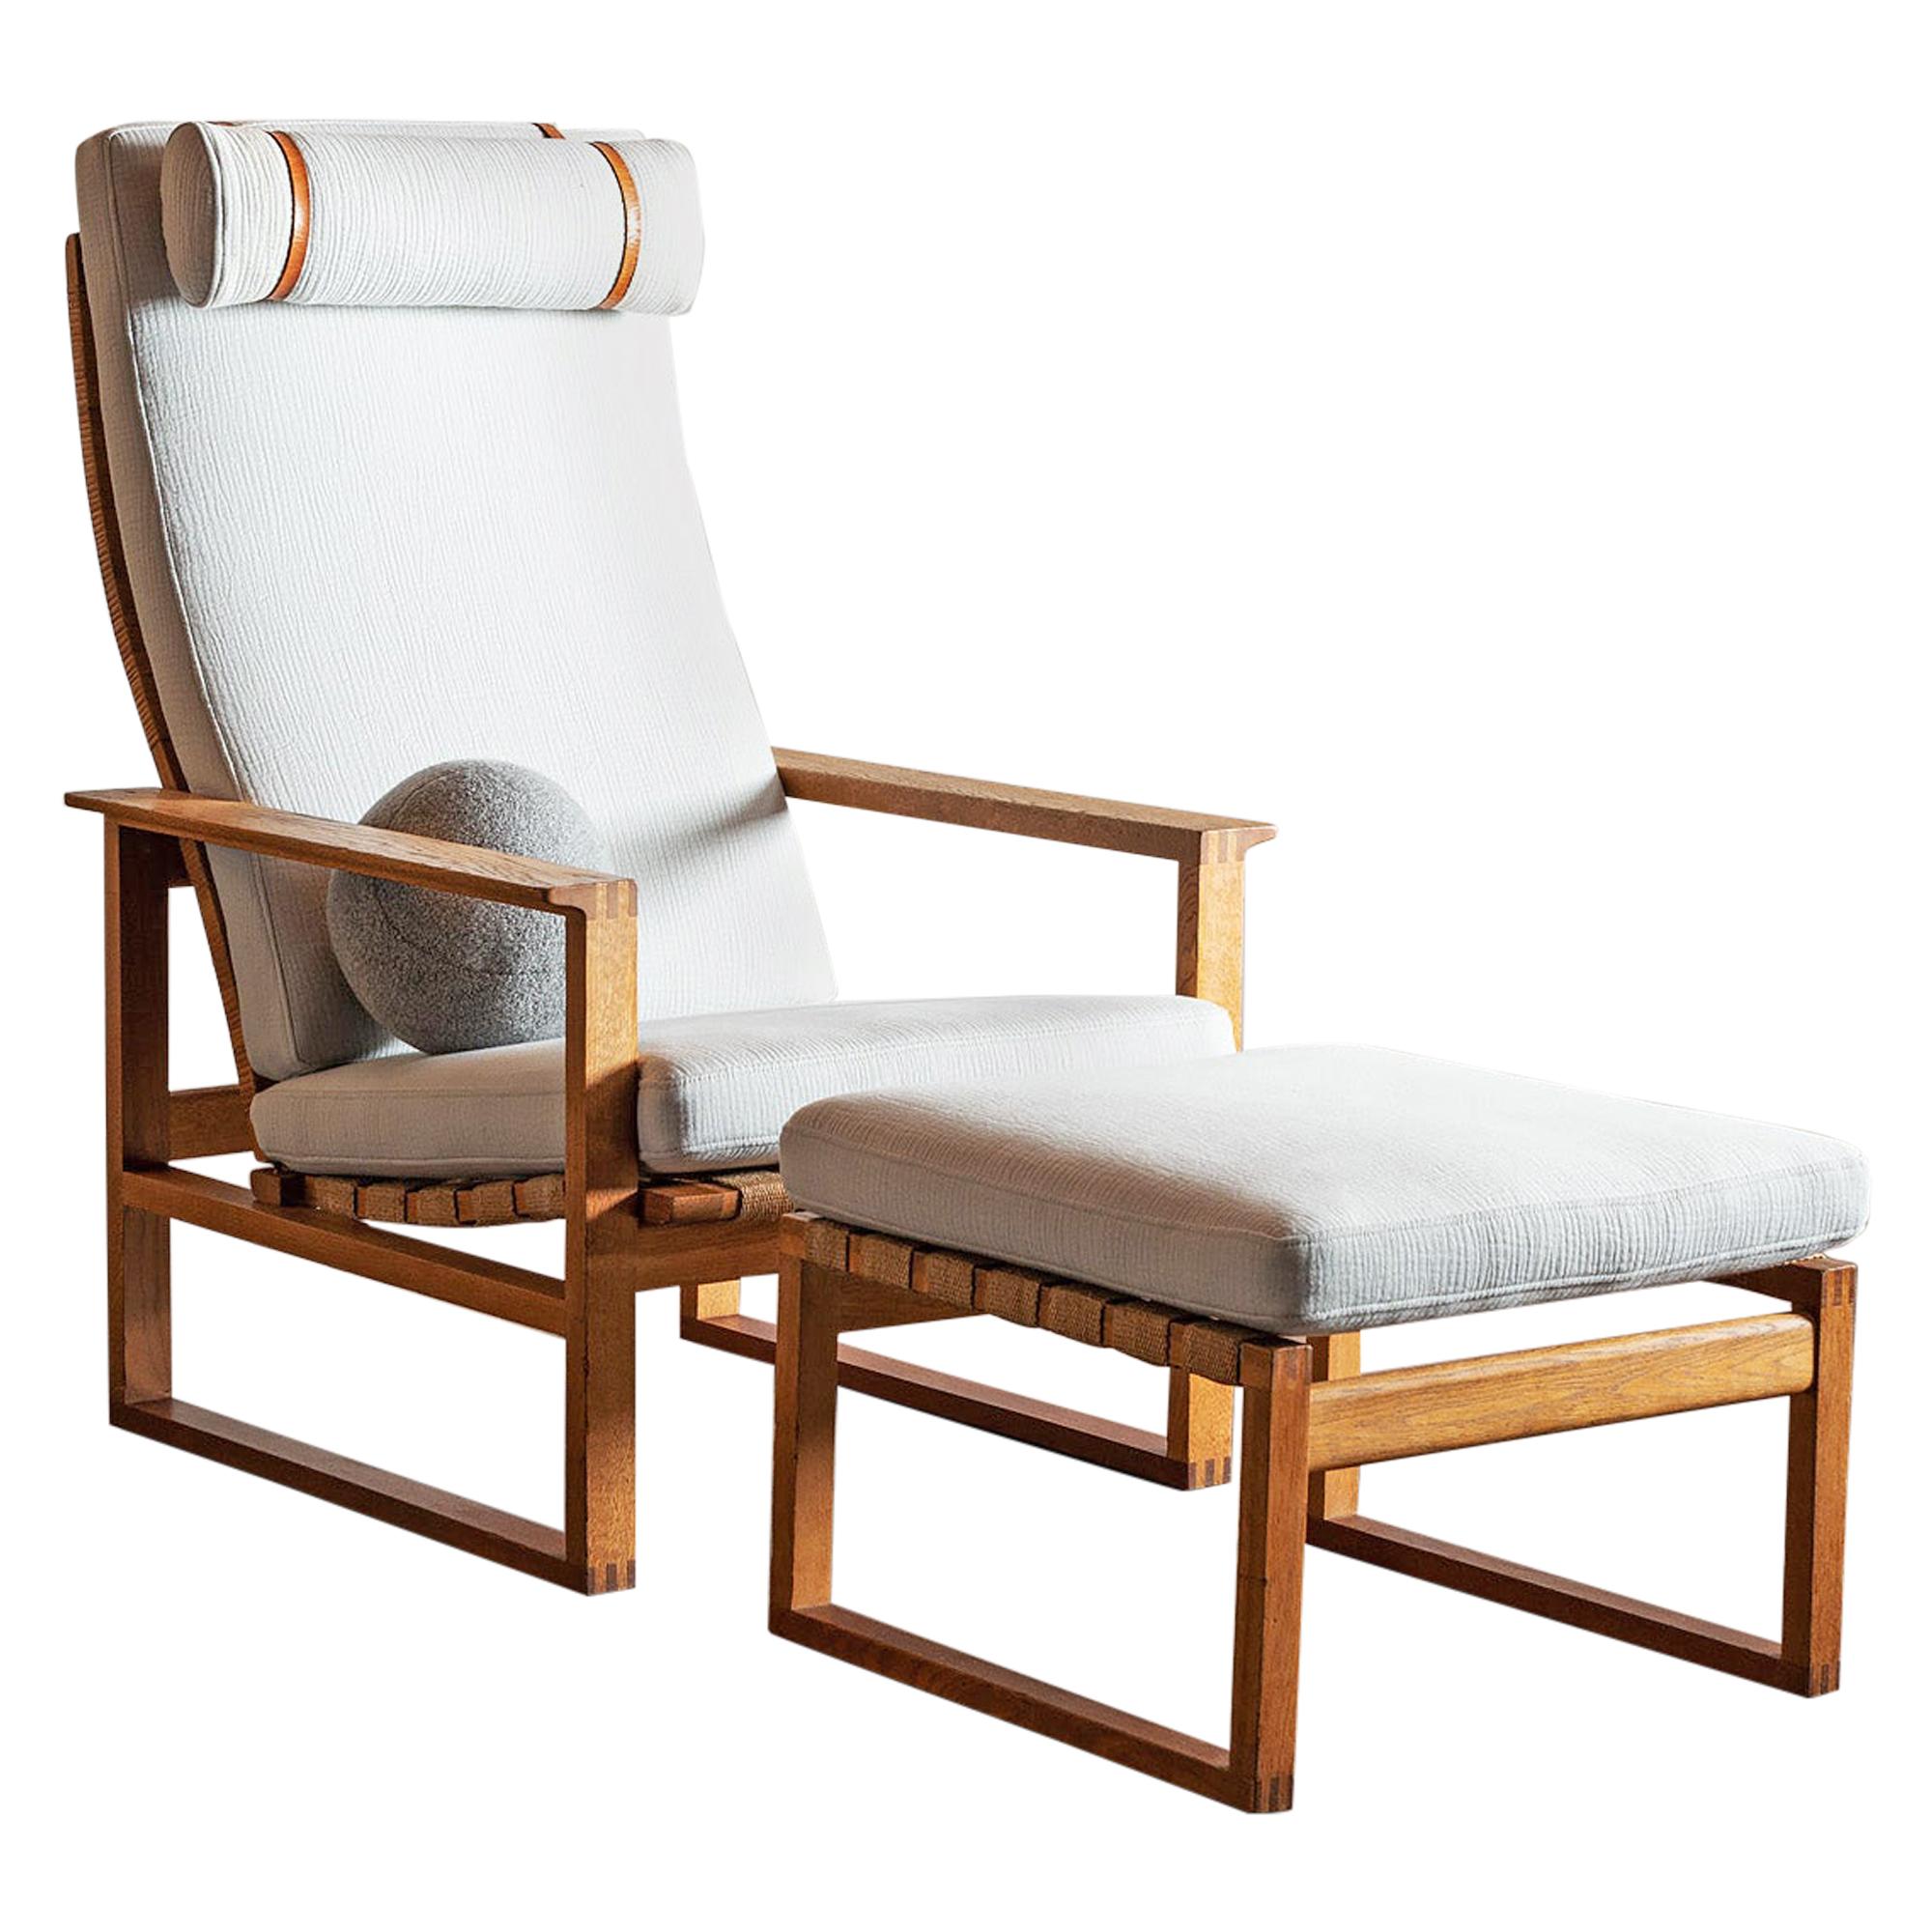 Børge Mogensen Model 2254 Lounge Chair with Ottoman, 1950s